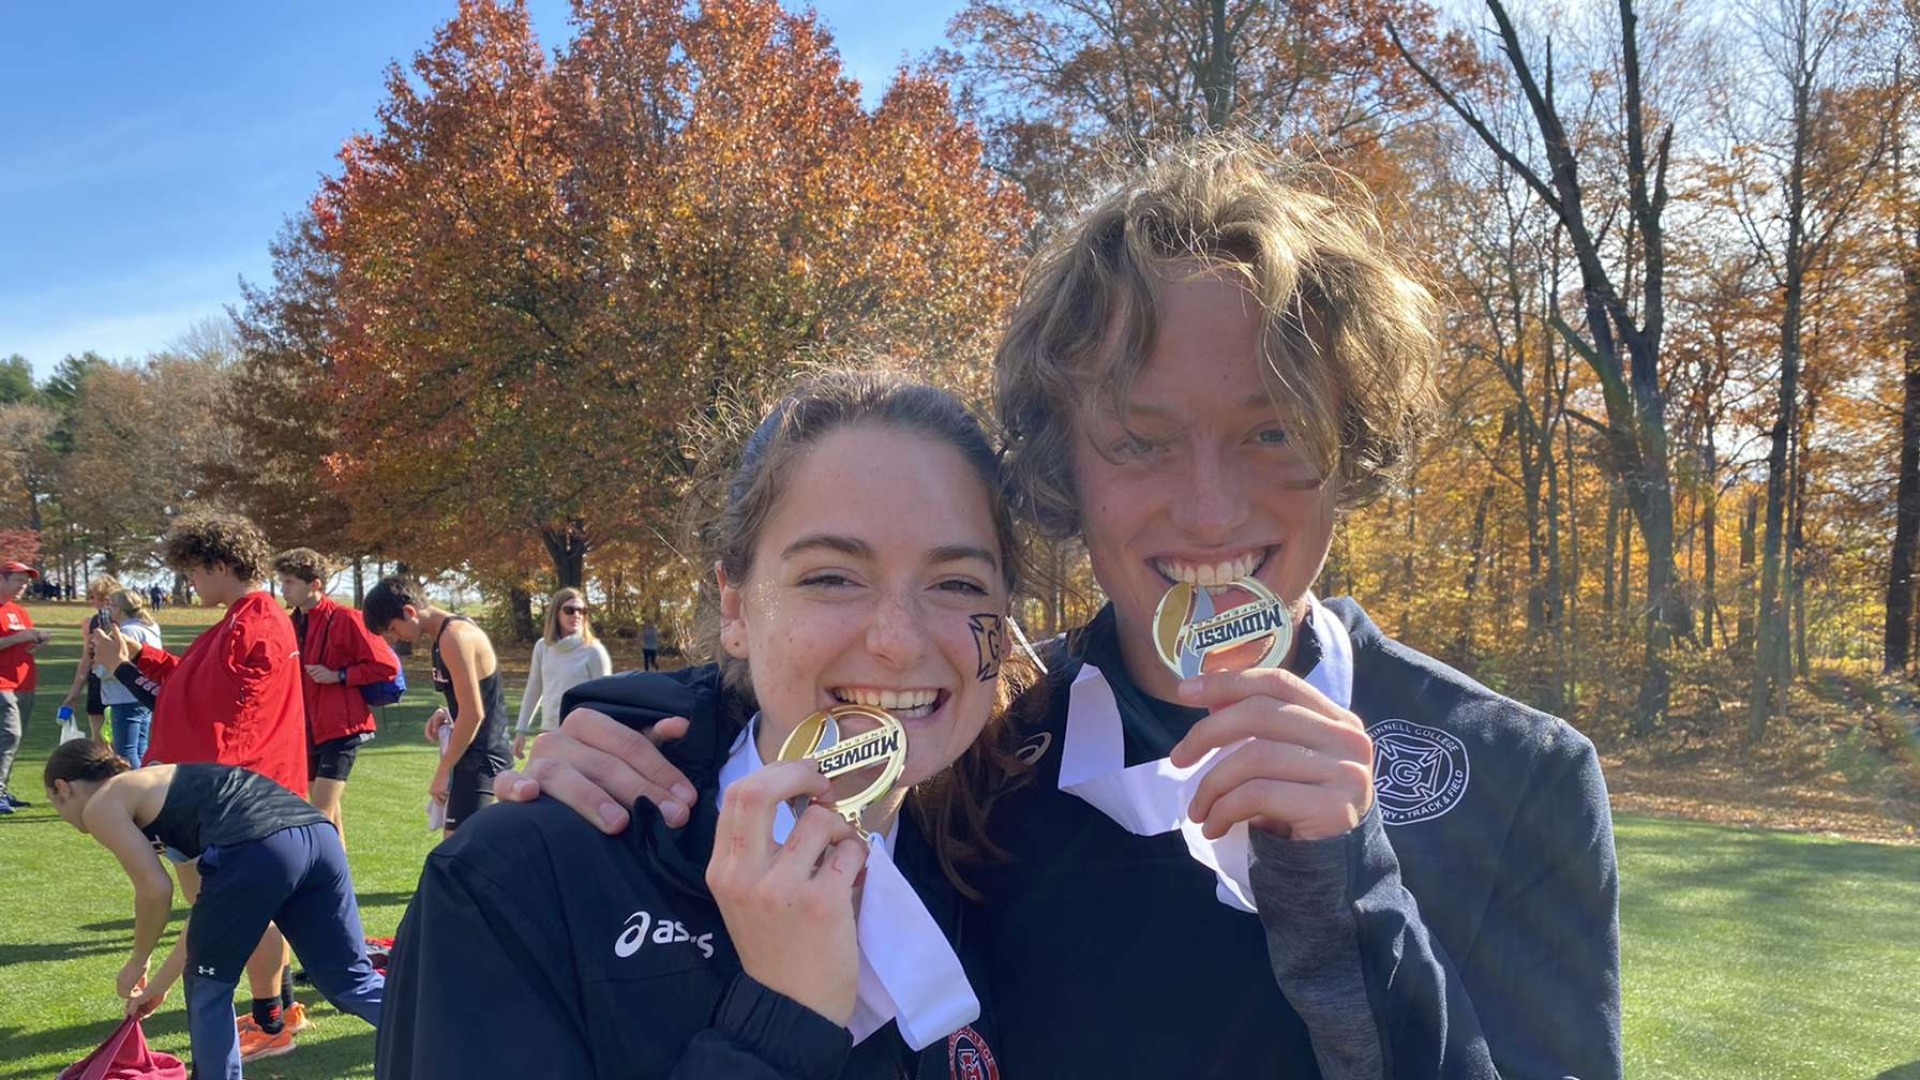 Me and Meg biting on our medals after the Invitational